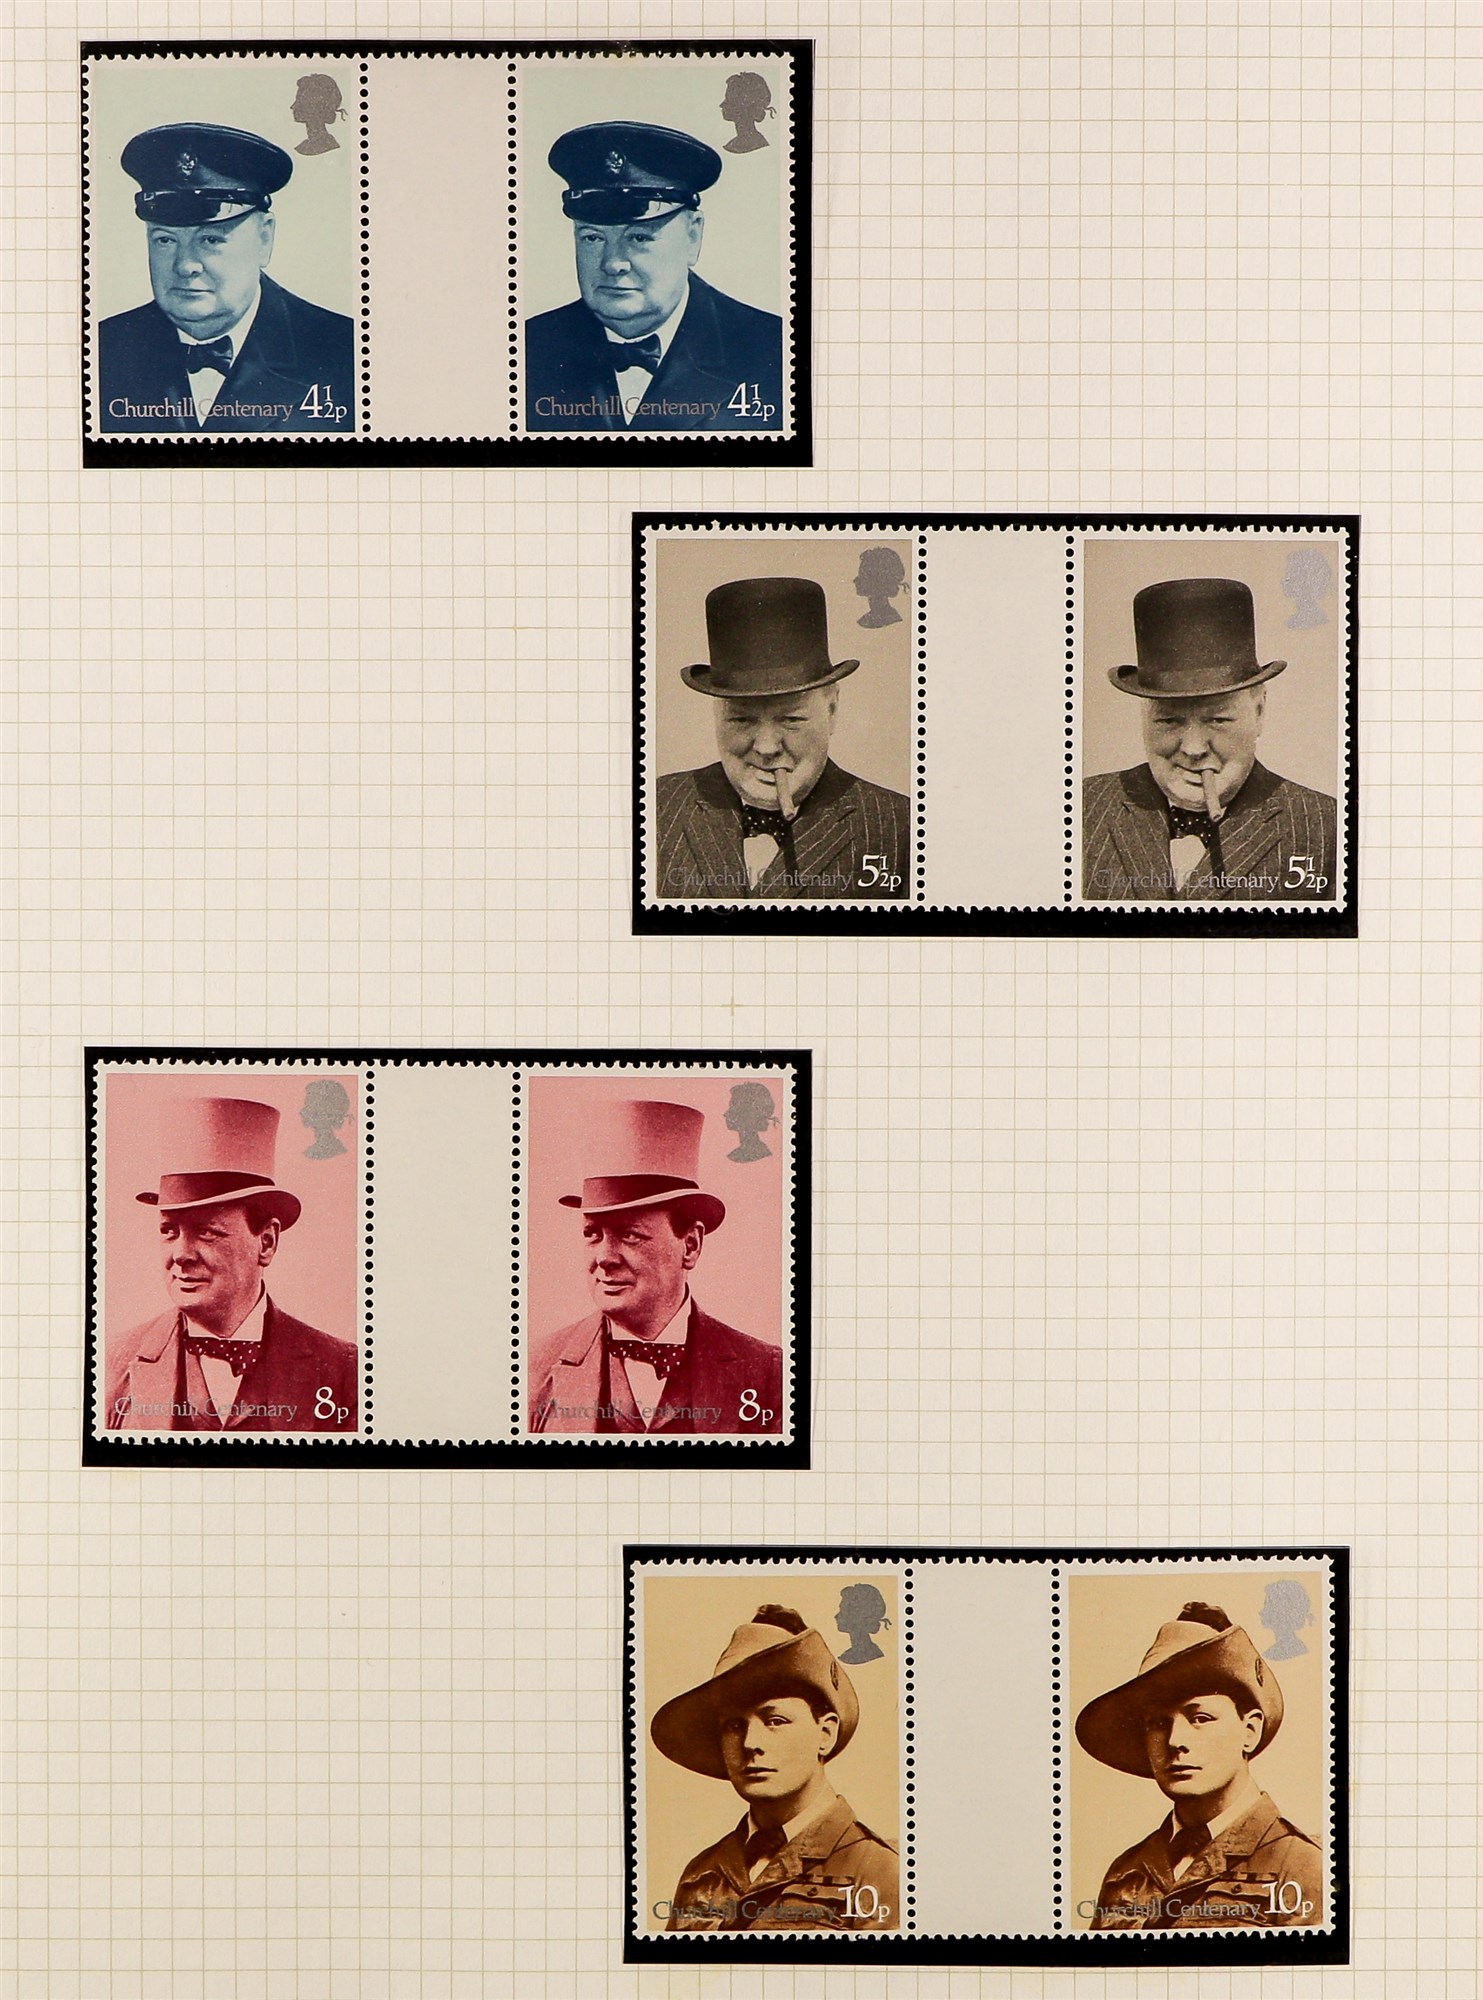 GREAT BRITAIN 1924-1982 MINT COLLECTION in hingeless mounts in two albums, later issues are never - Image 15 of 27